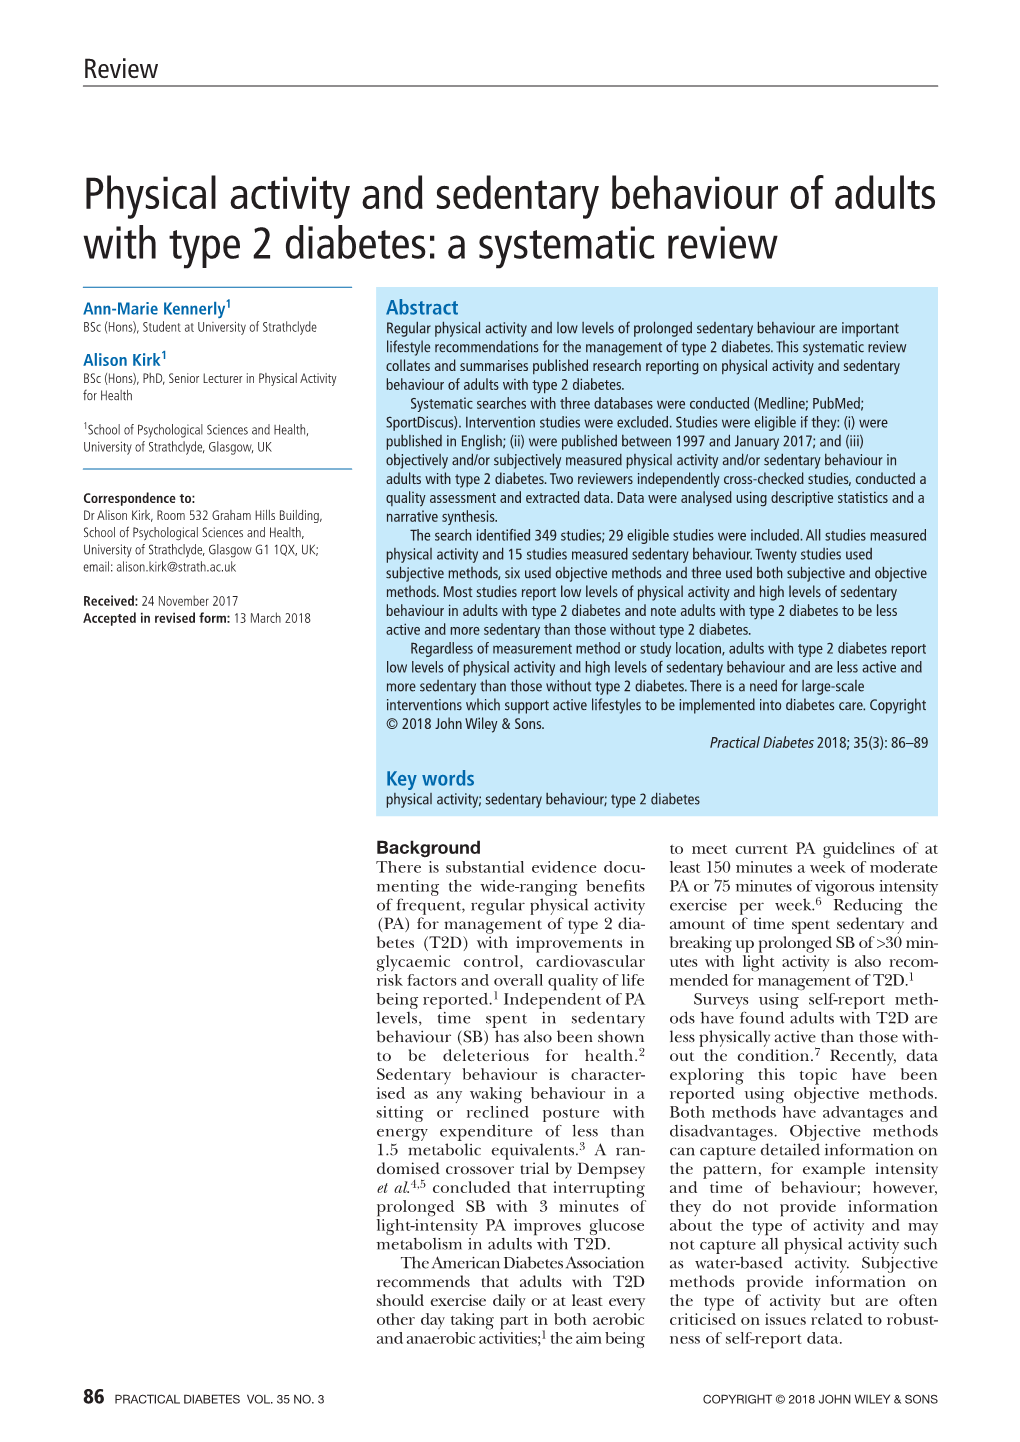 Physical Activity and Sedentary Behaviour of Adults with Type 2 Diabetes: a Systematic Review